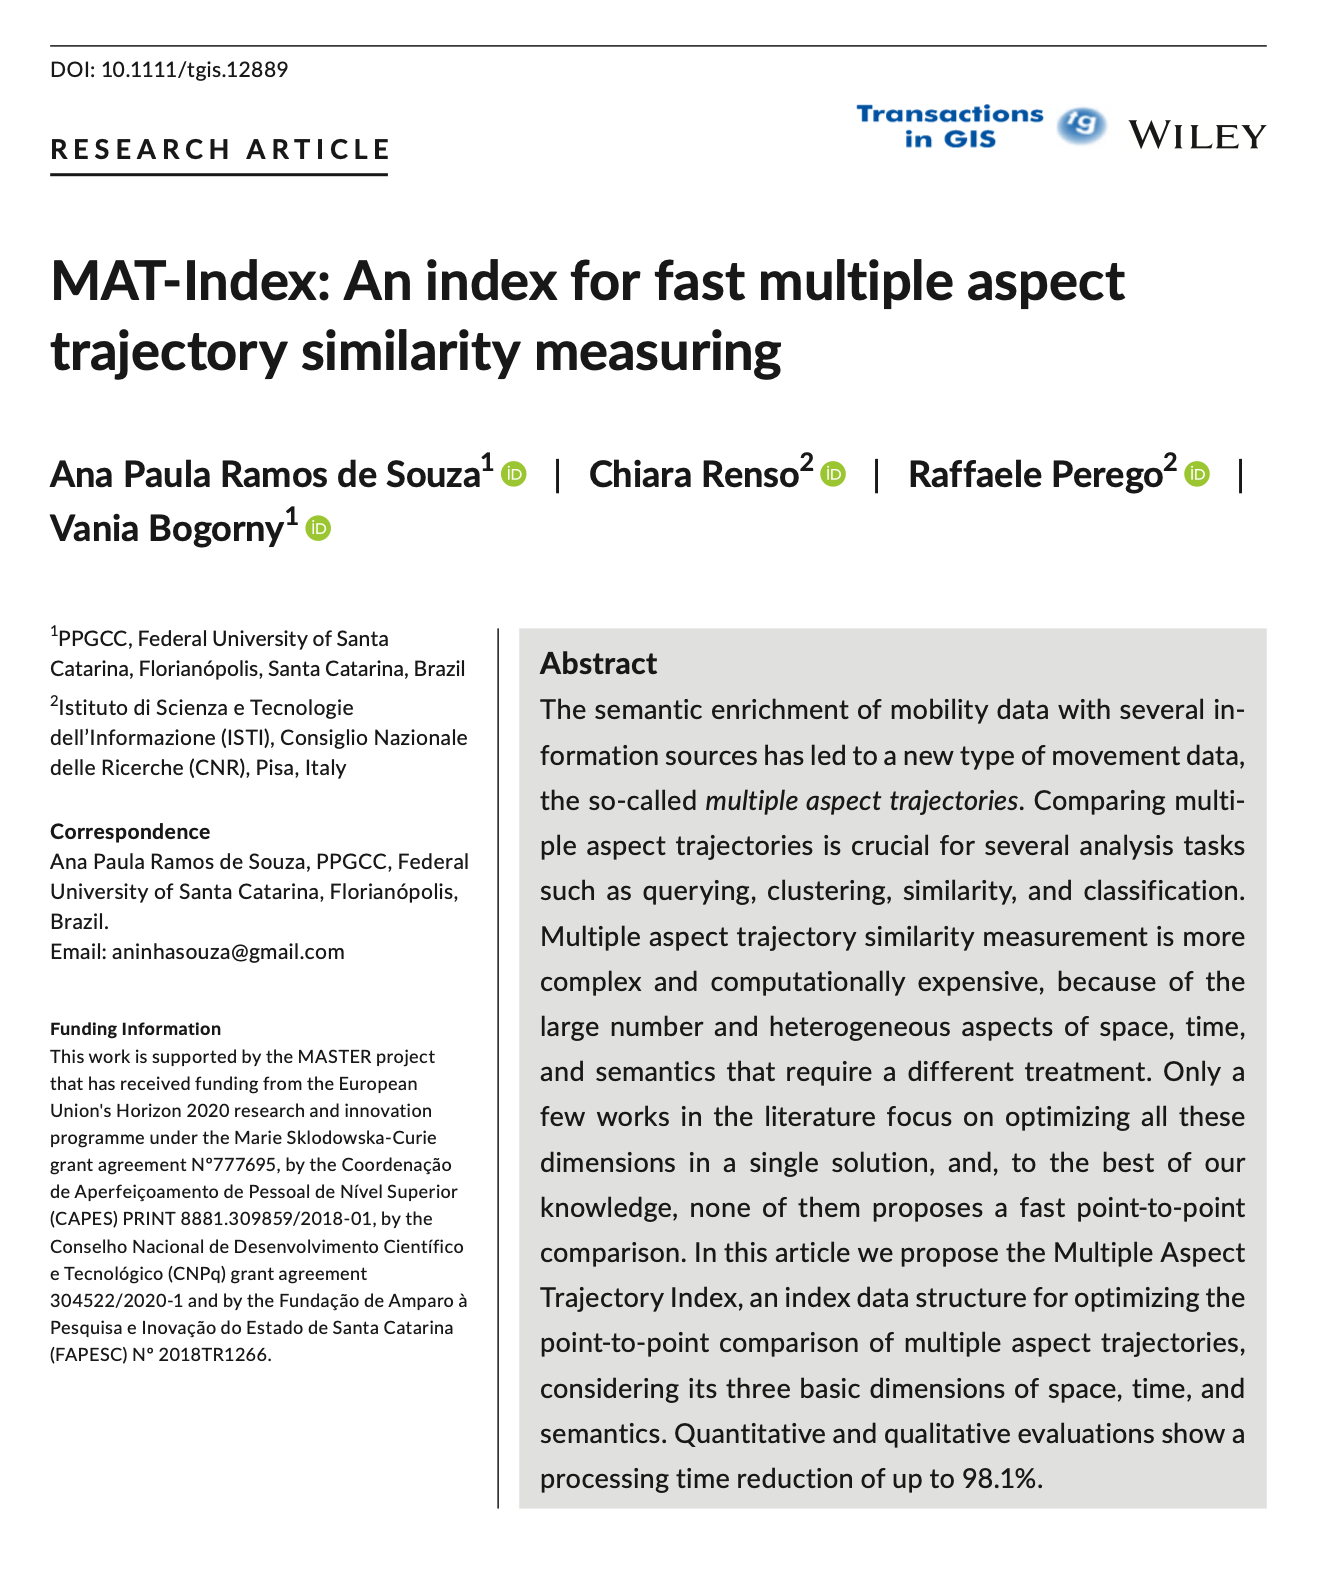 Paper “MAT-Index: An index for fast multiple aspect trajectory similarity measuring” published at Transactions in GIS